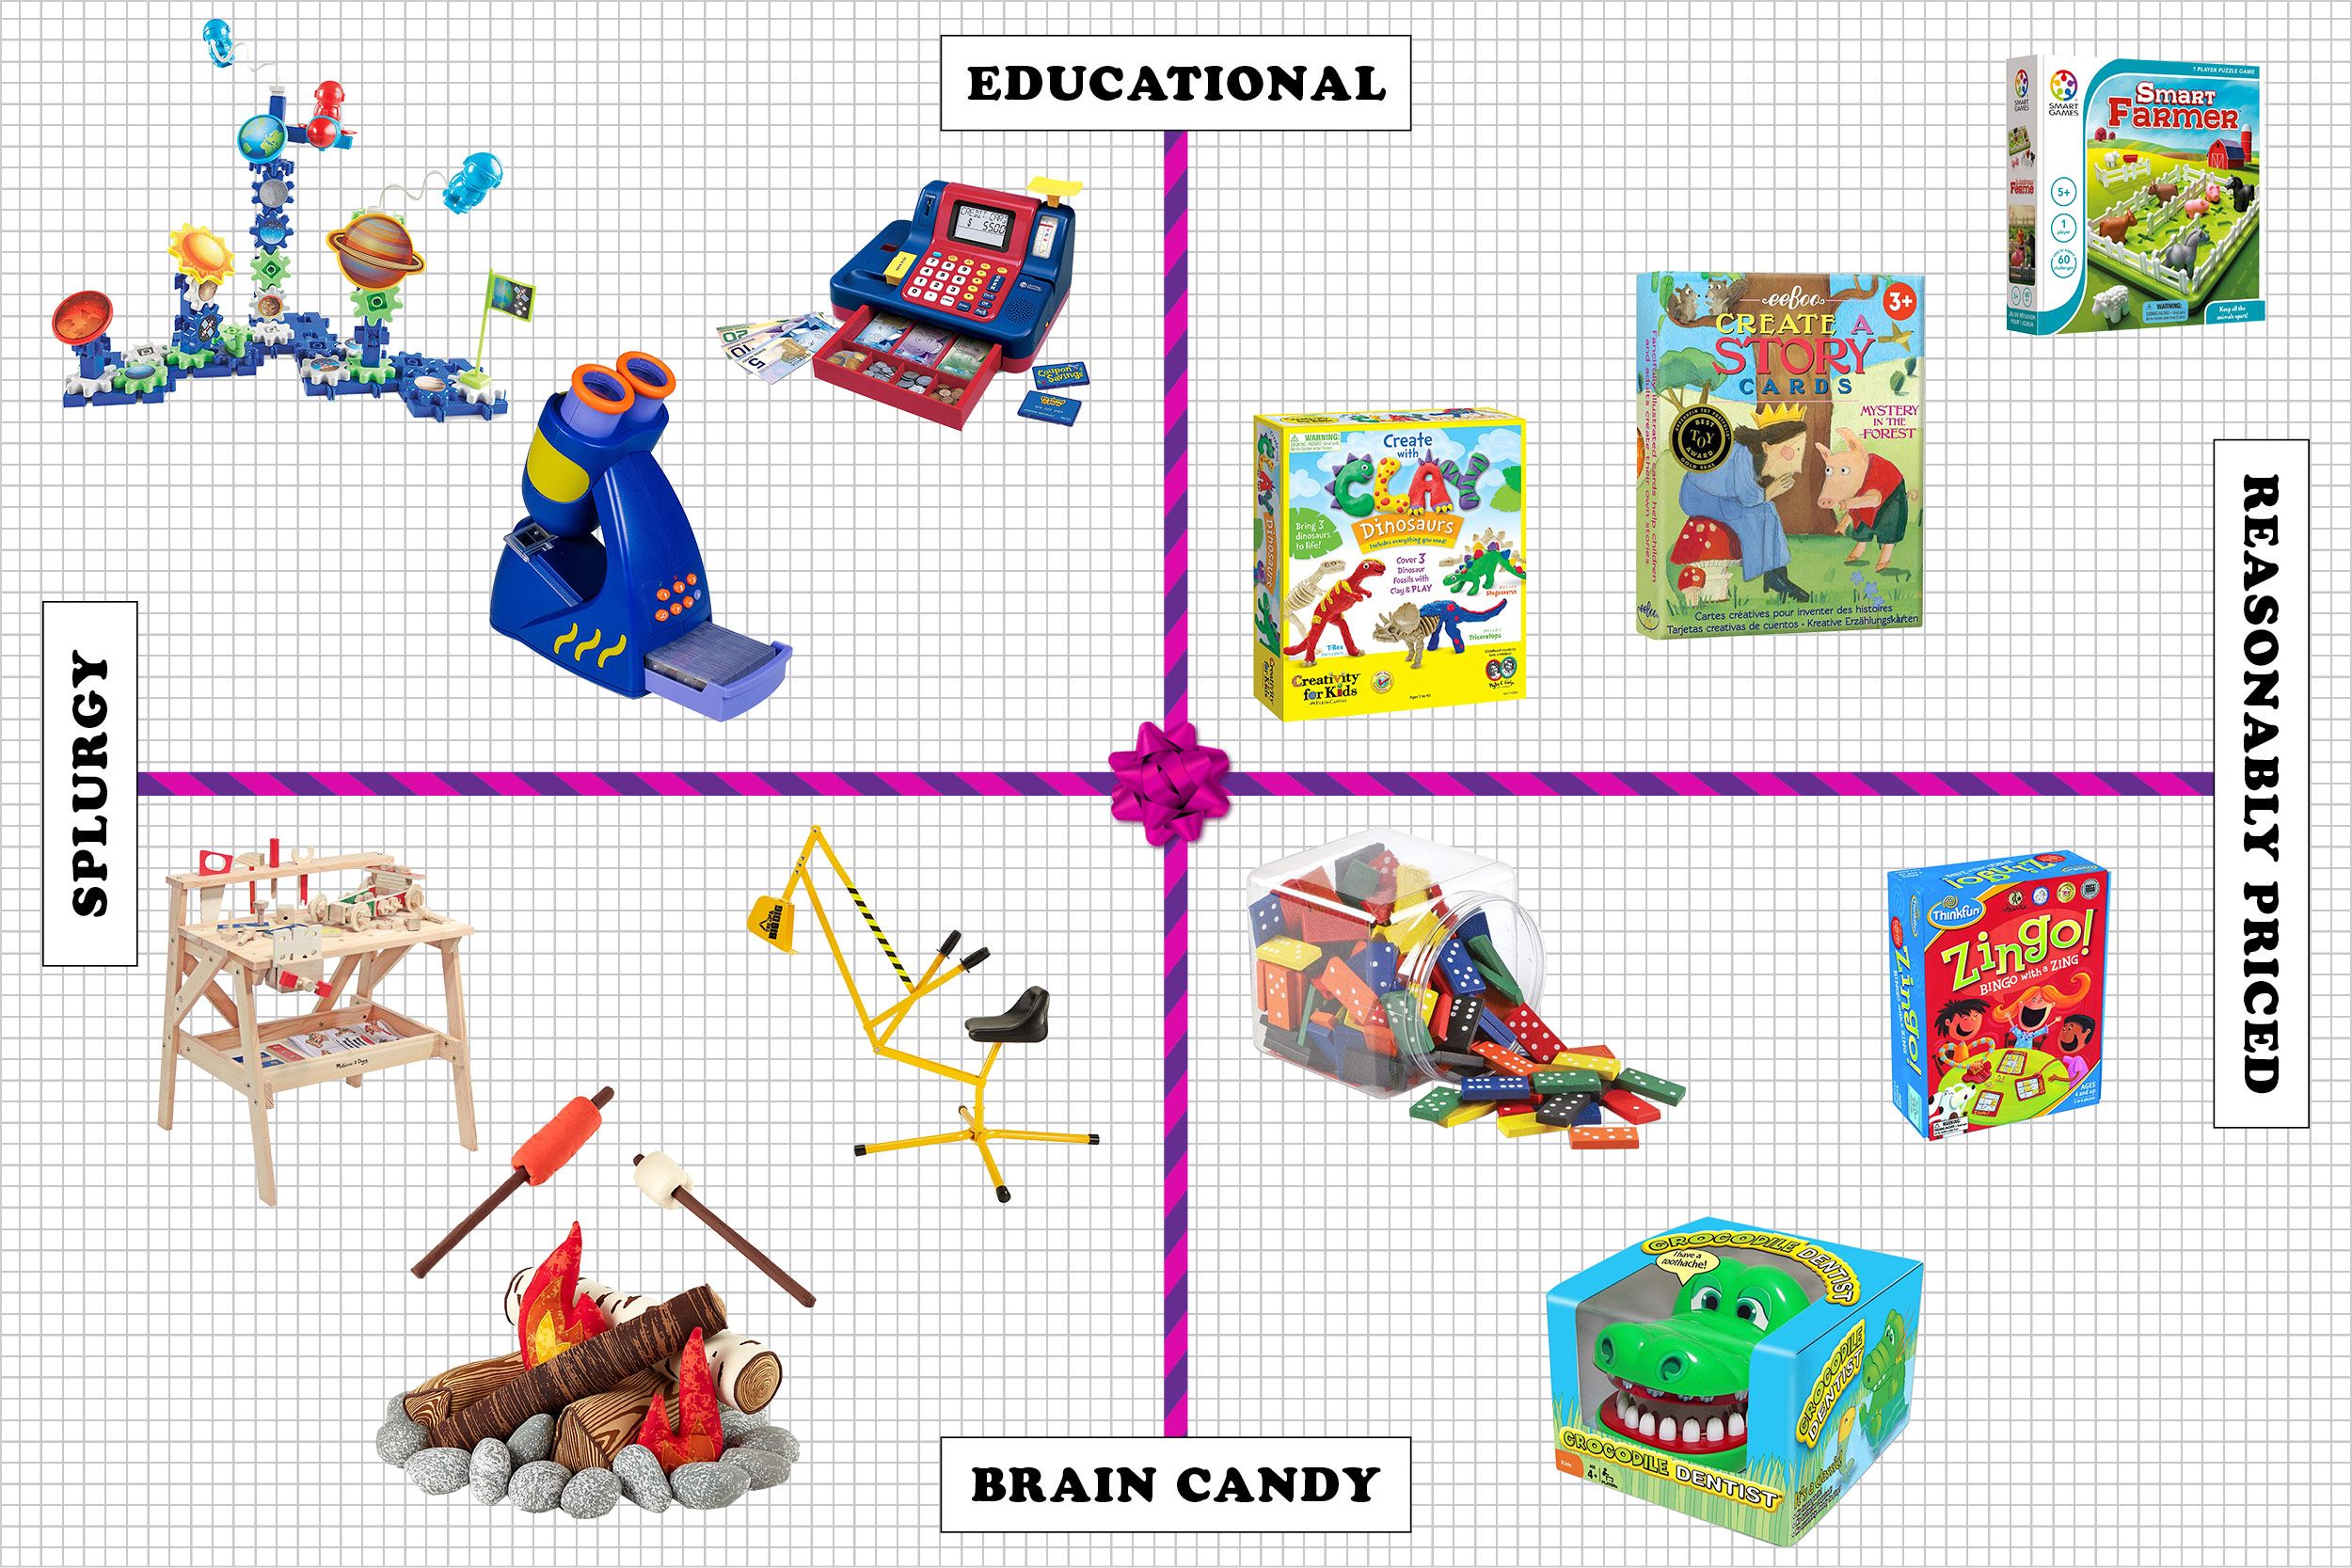 Christmas Kids Card's Educational Similar To DOBLE Vocabulary Building Game 